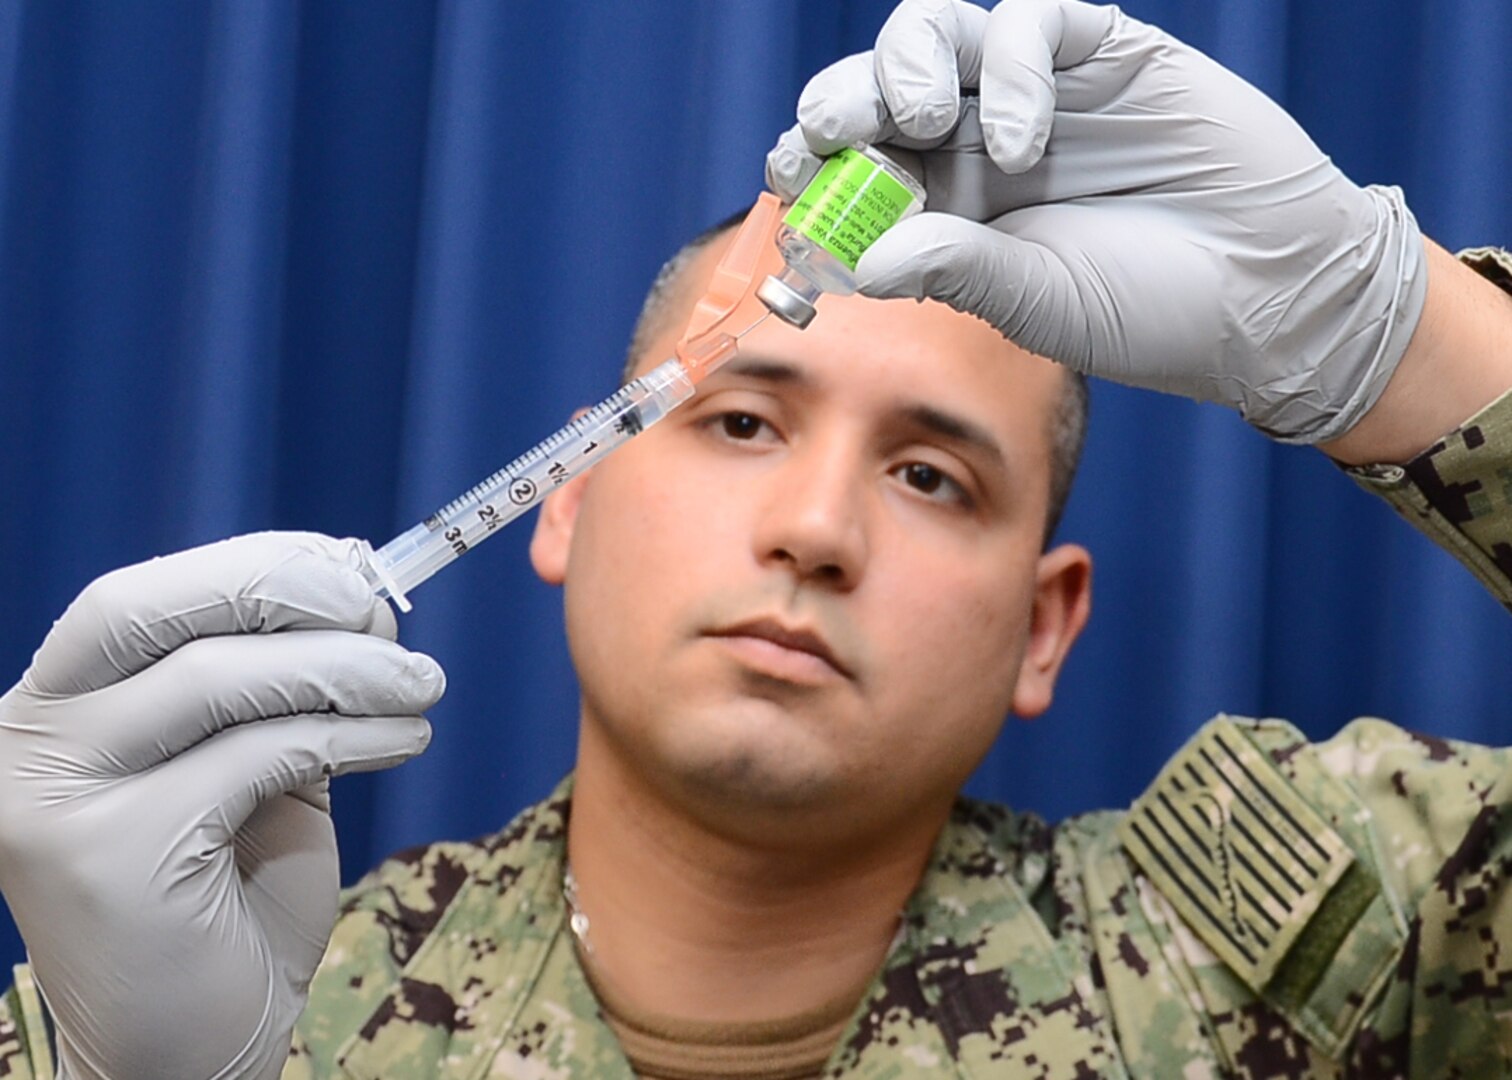 Navy Retail Services Specialist 2nd Class Tomas Vasquez prepares a syringe with the influenza vaccine before administering annual Flu Shots at Naval Health Clinic Corpus Christi.